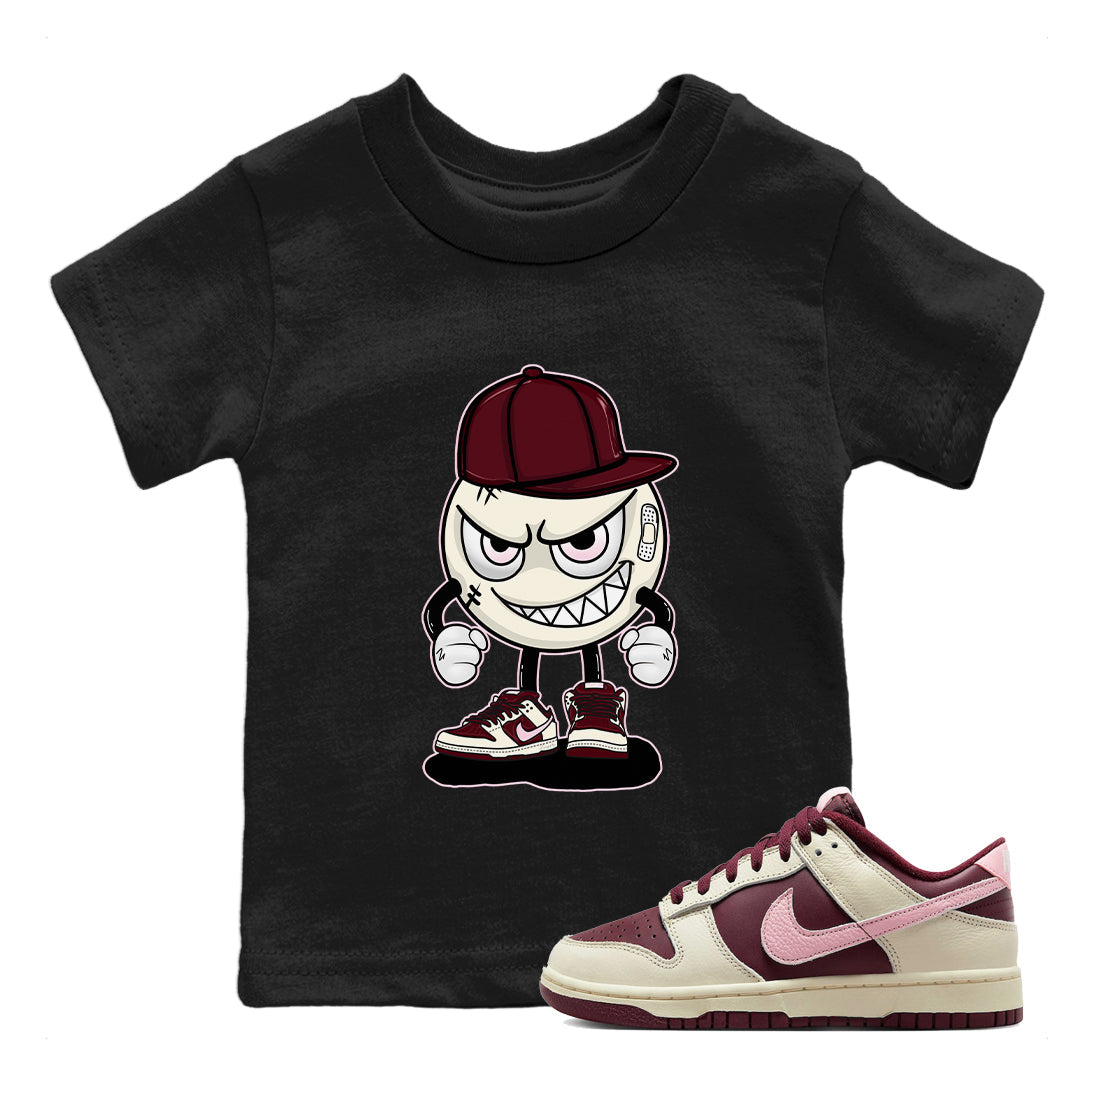 Dunk Valentines Day Sneaker Match Tees Mischief Emoji Sneaker Tees Nike Dunk Valentine's Day Sneaker SNRT Sneaker Tees Kids Shirts